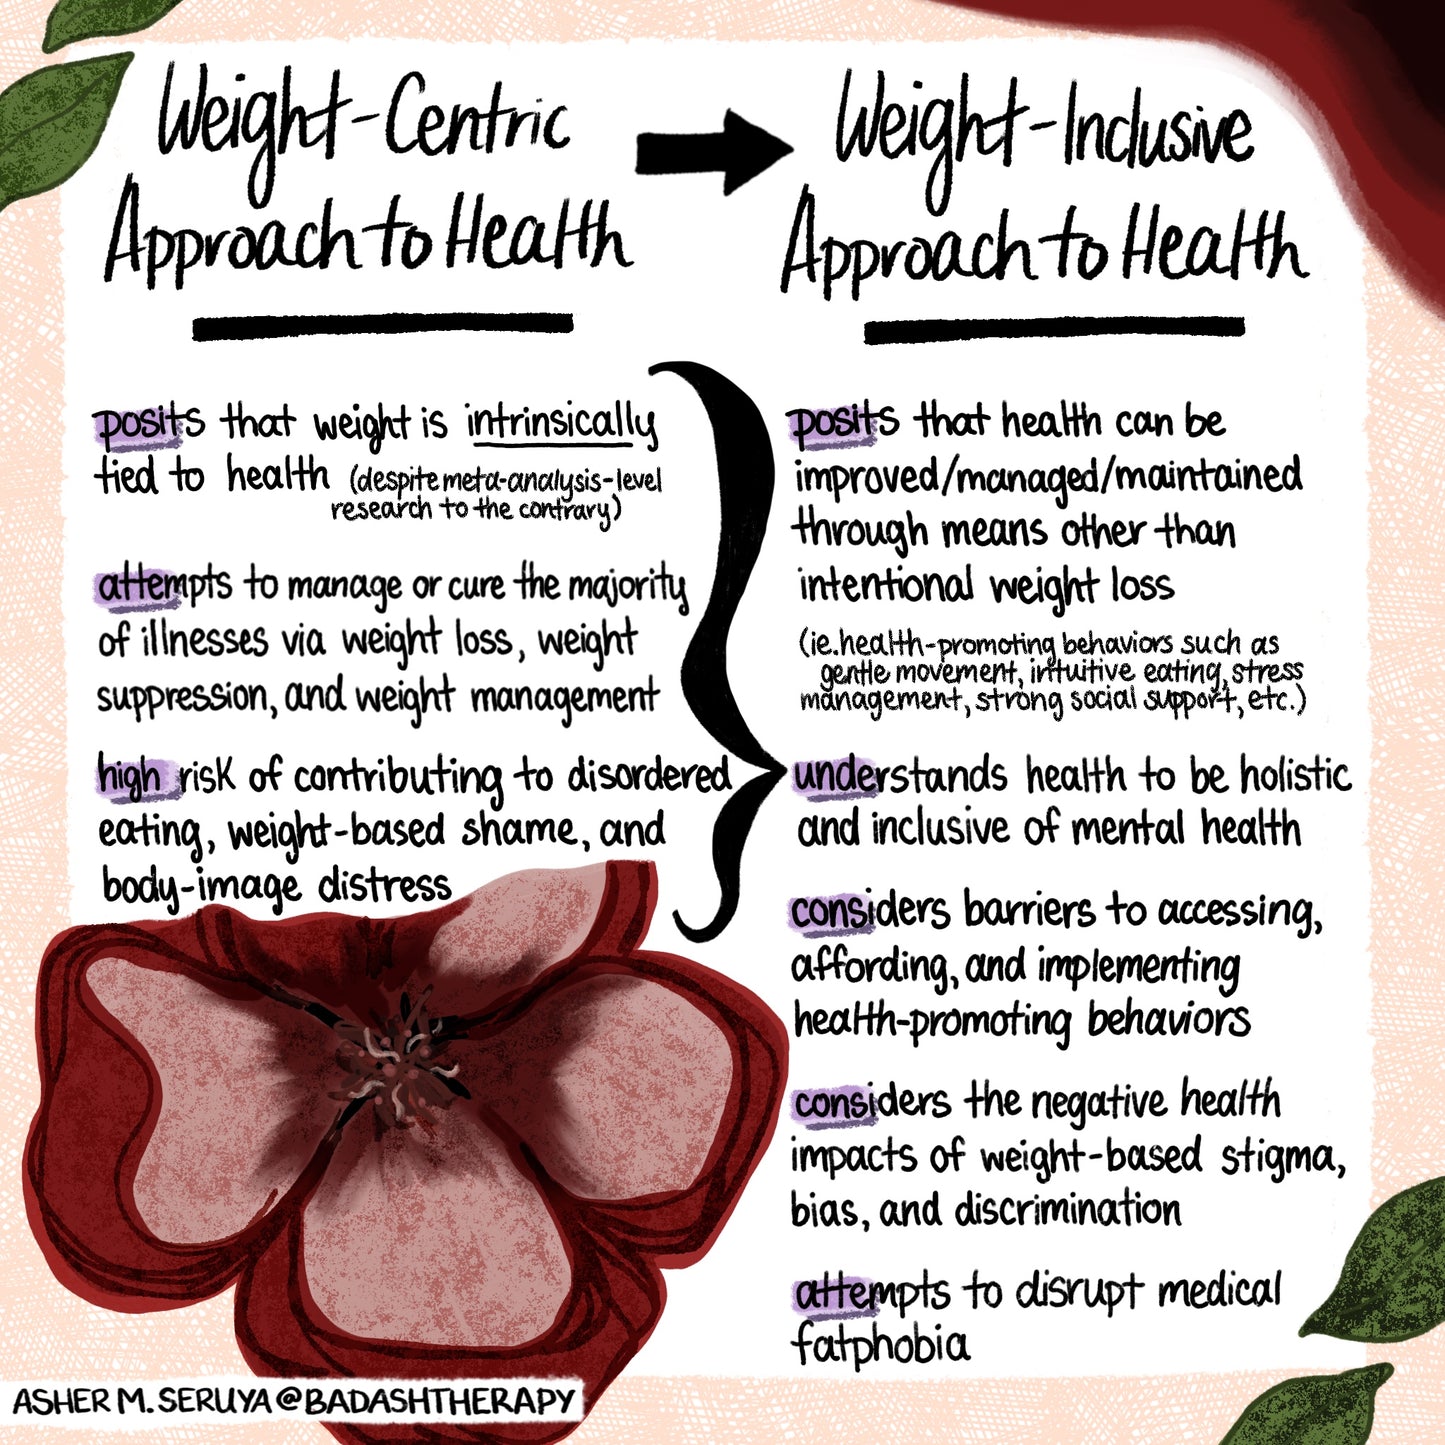 Shifting Towards a Weight-Inclusive Approach to Health - Illustrated Infographic